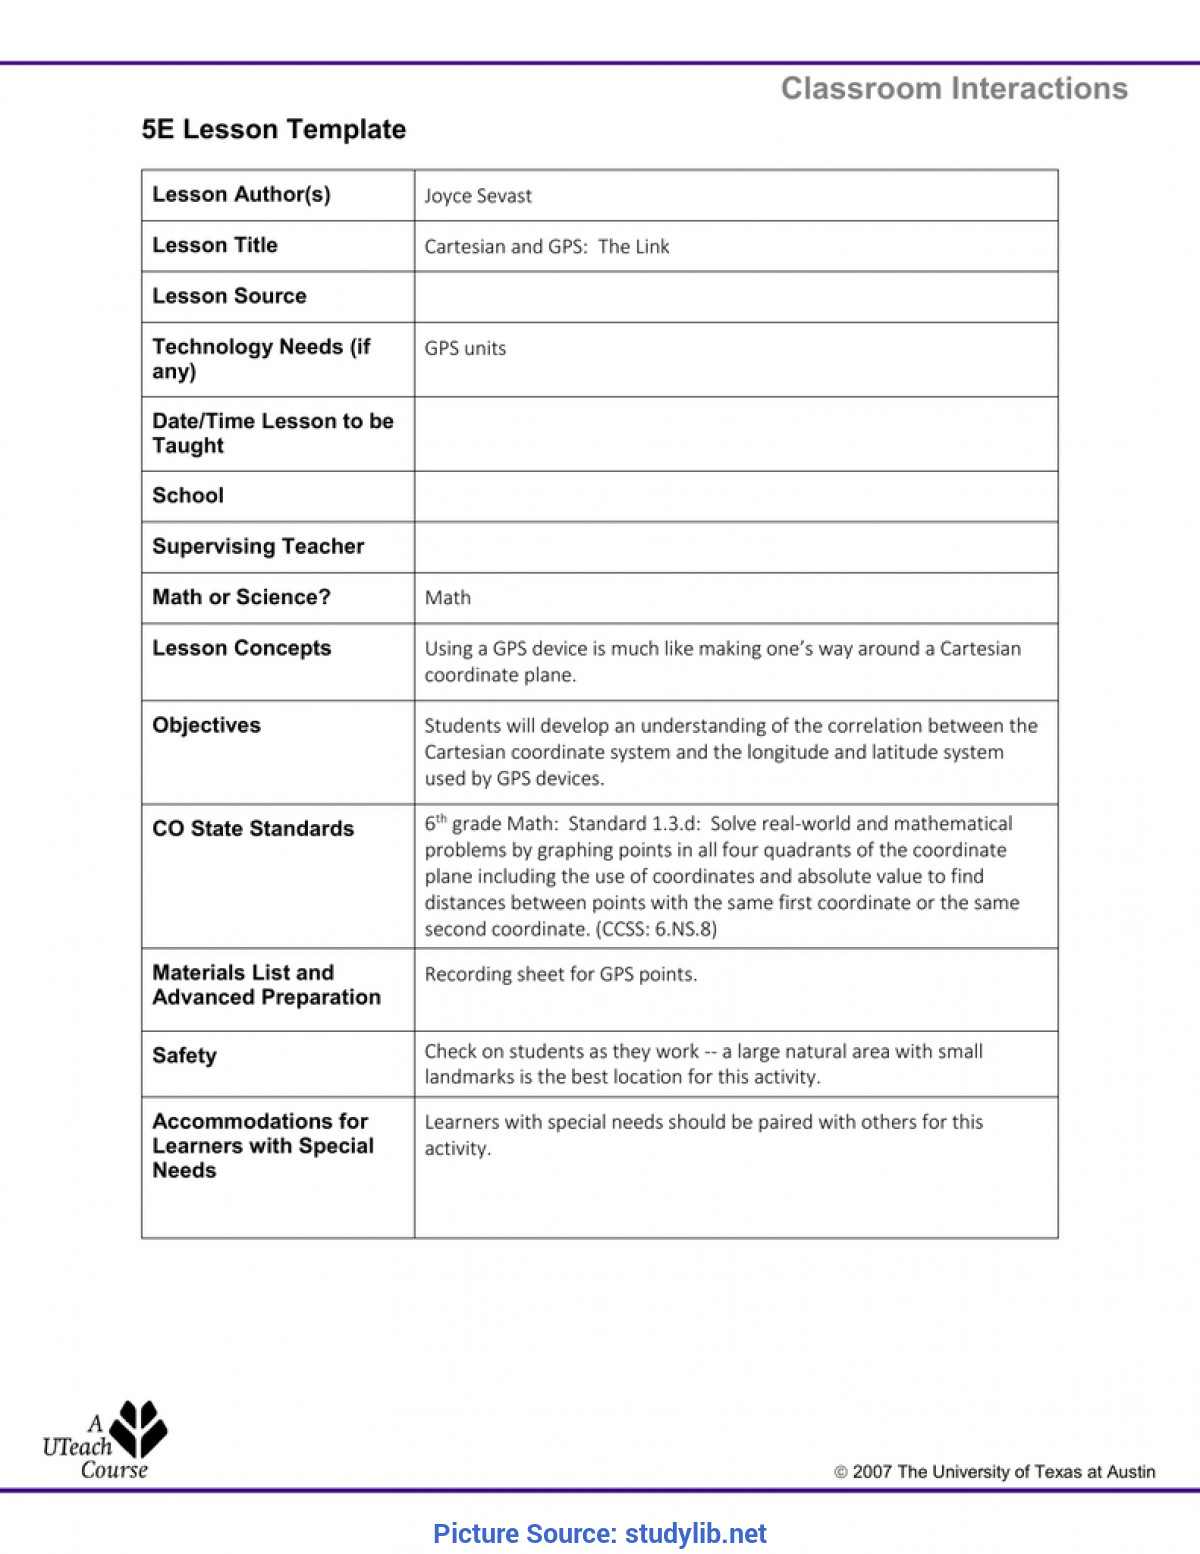 5e Lesson Plan Examples 5e Lesson Plan Instruction Model and Application